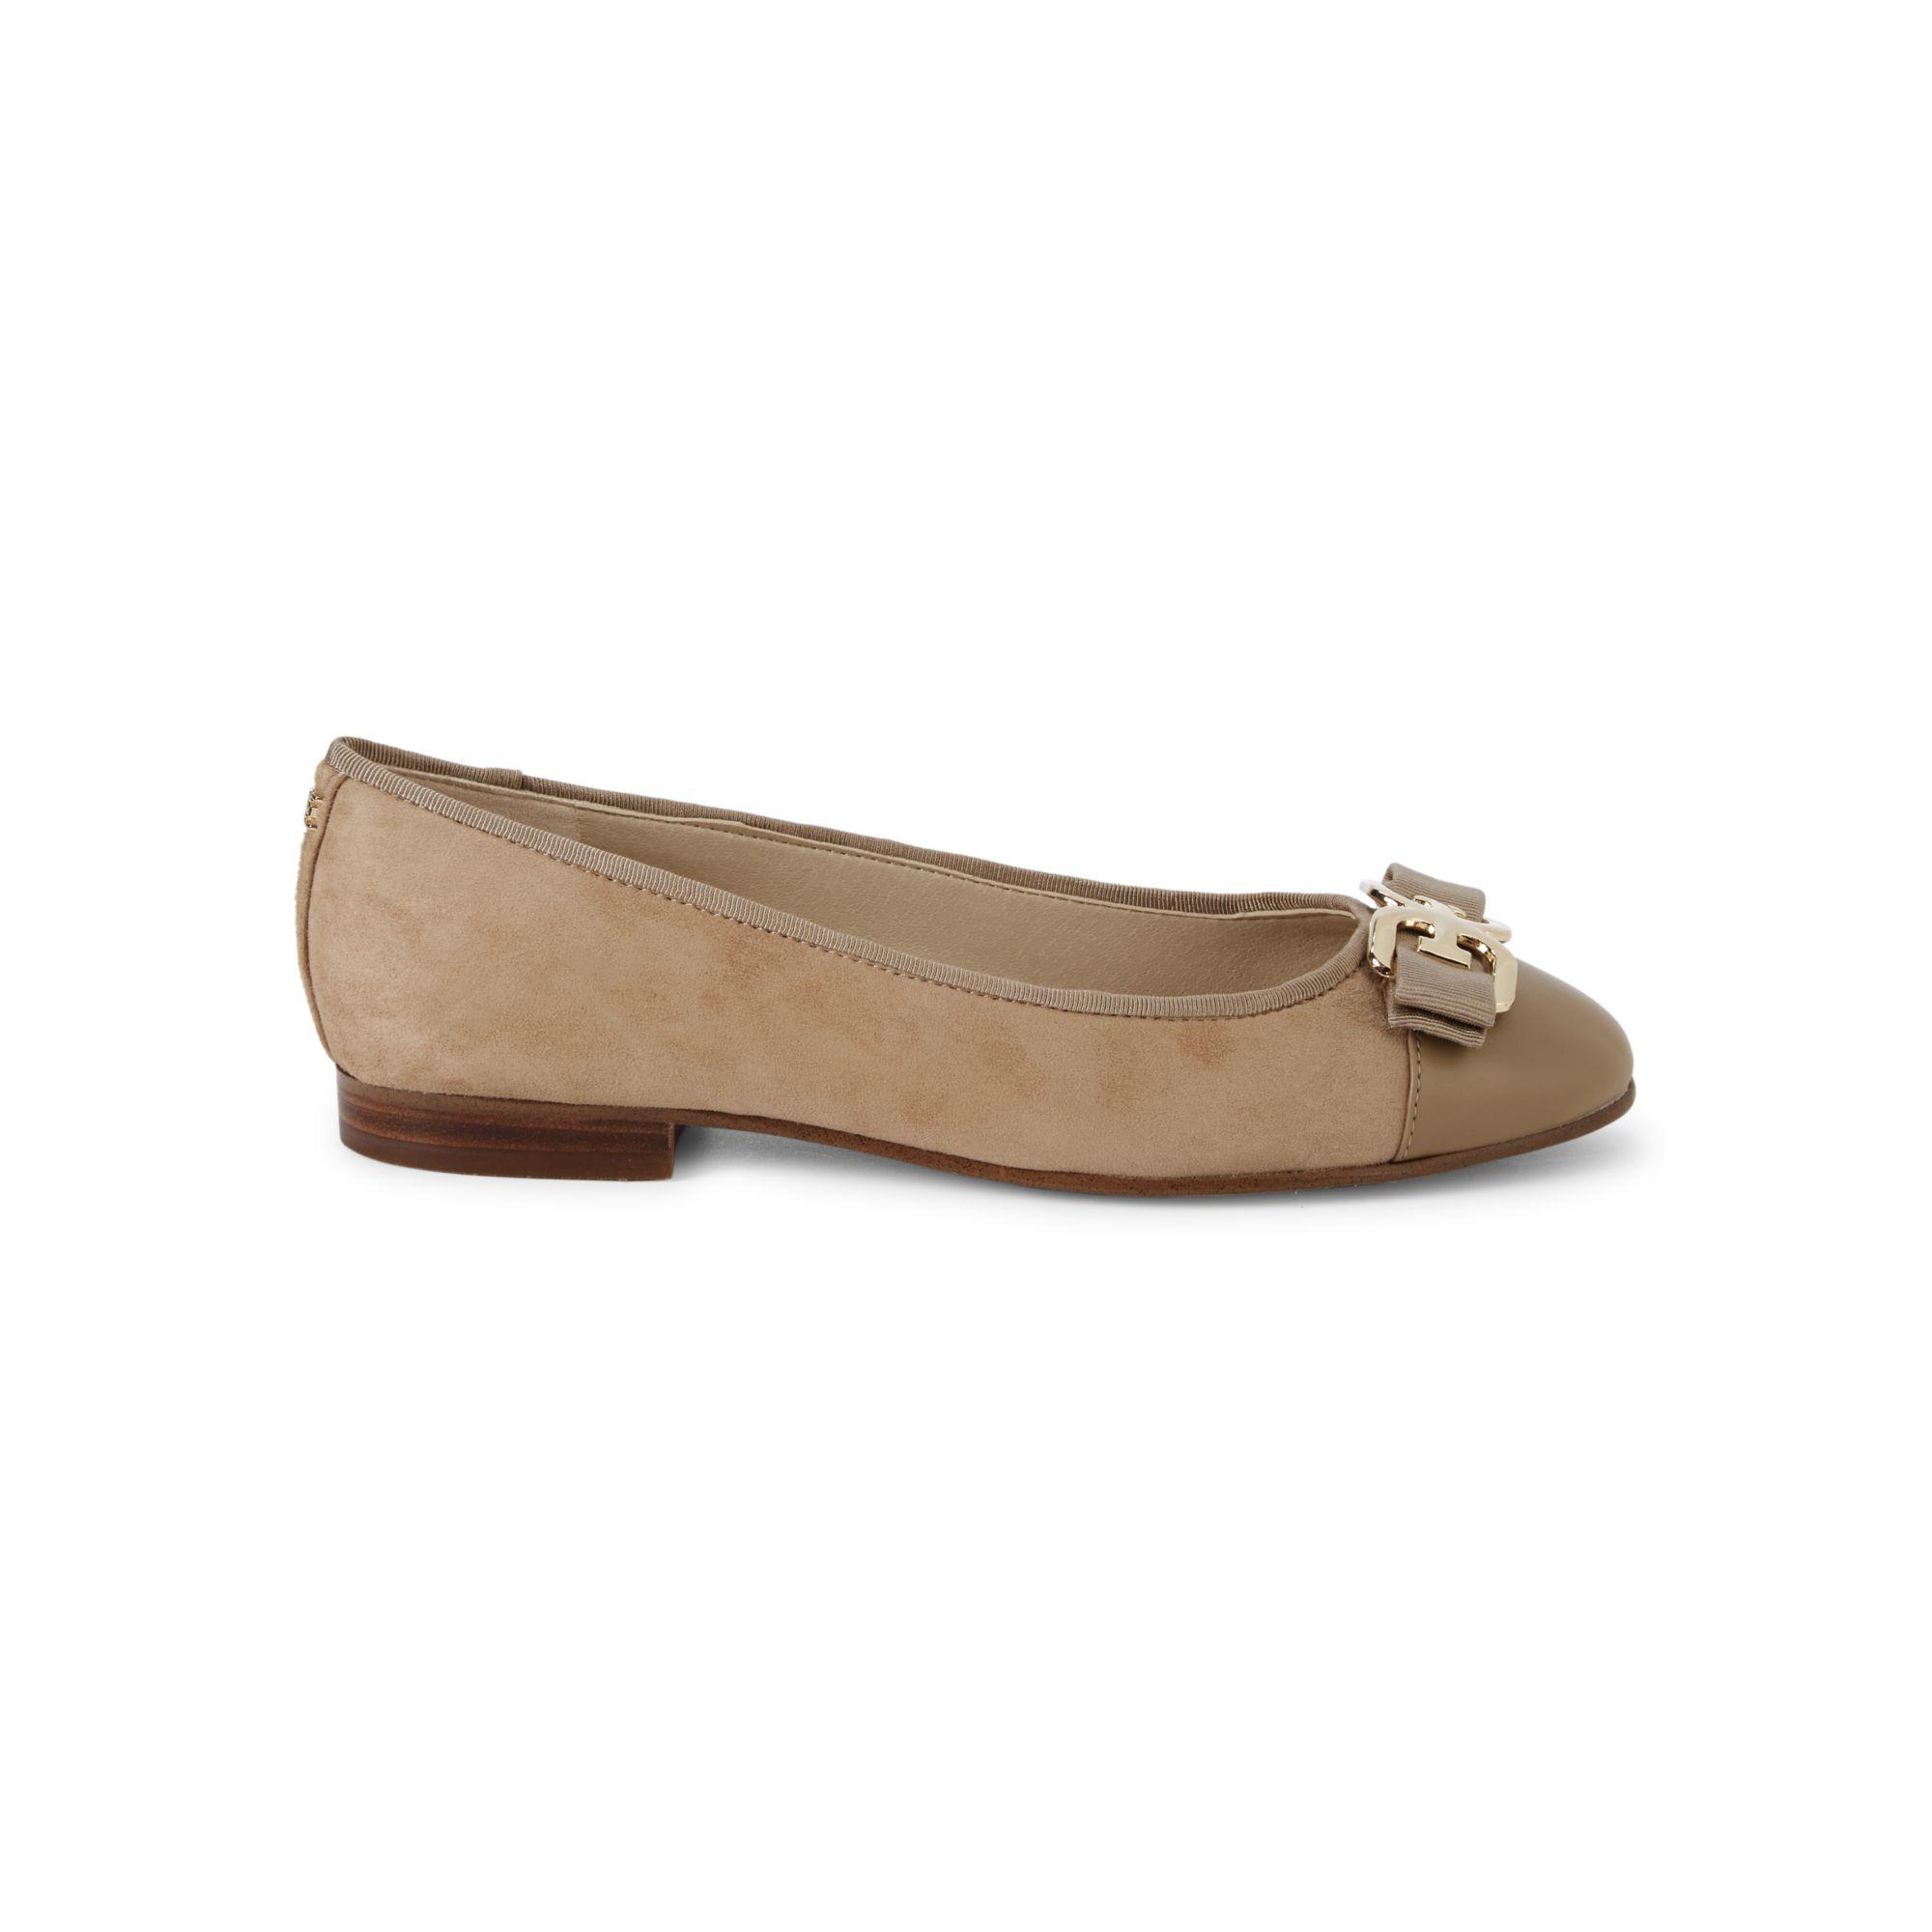 Sam Edelman Suede Mage Slip-on Flats in Oatmeal (Natural) - Lyst